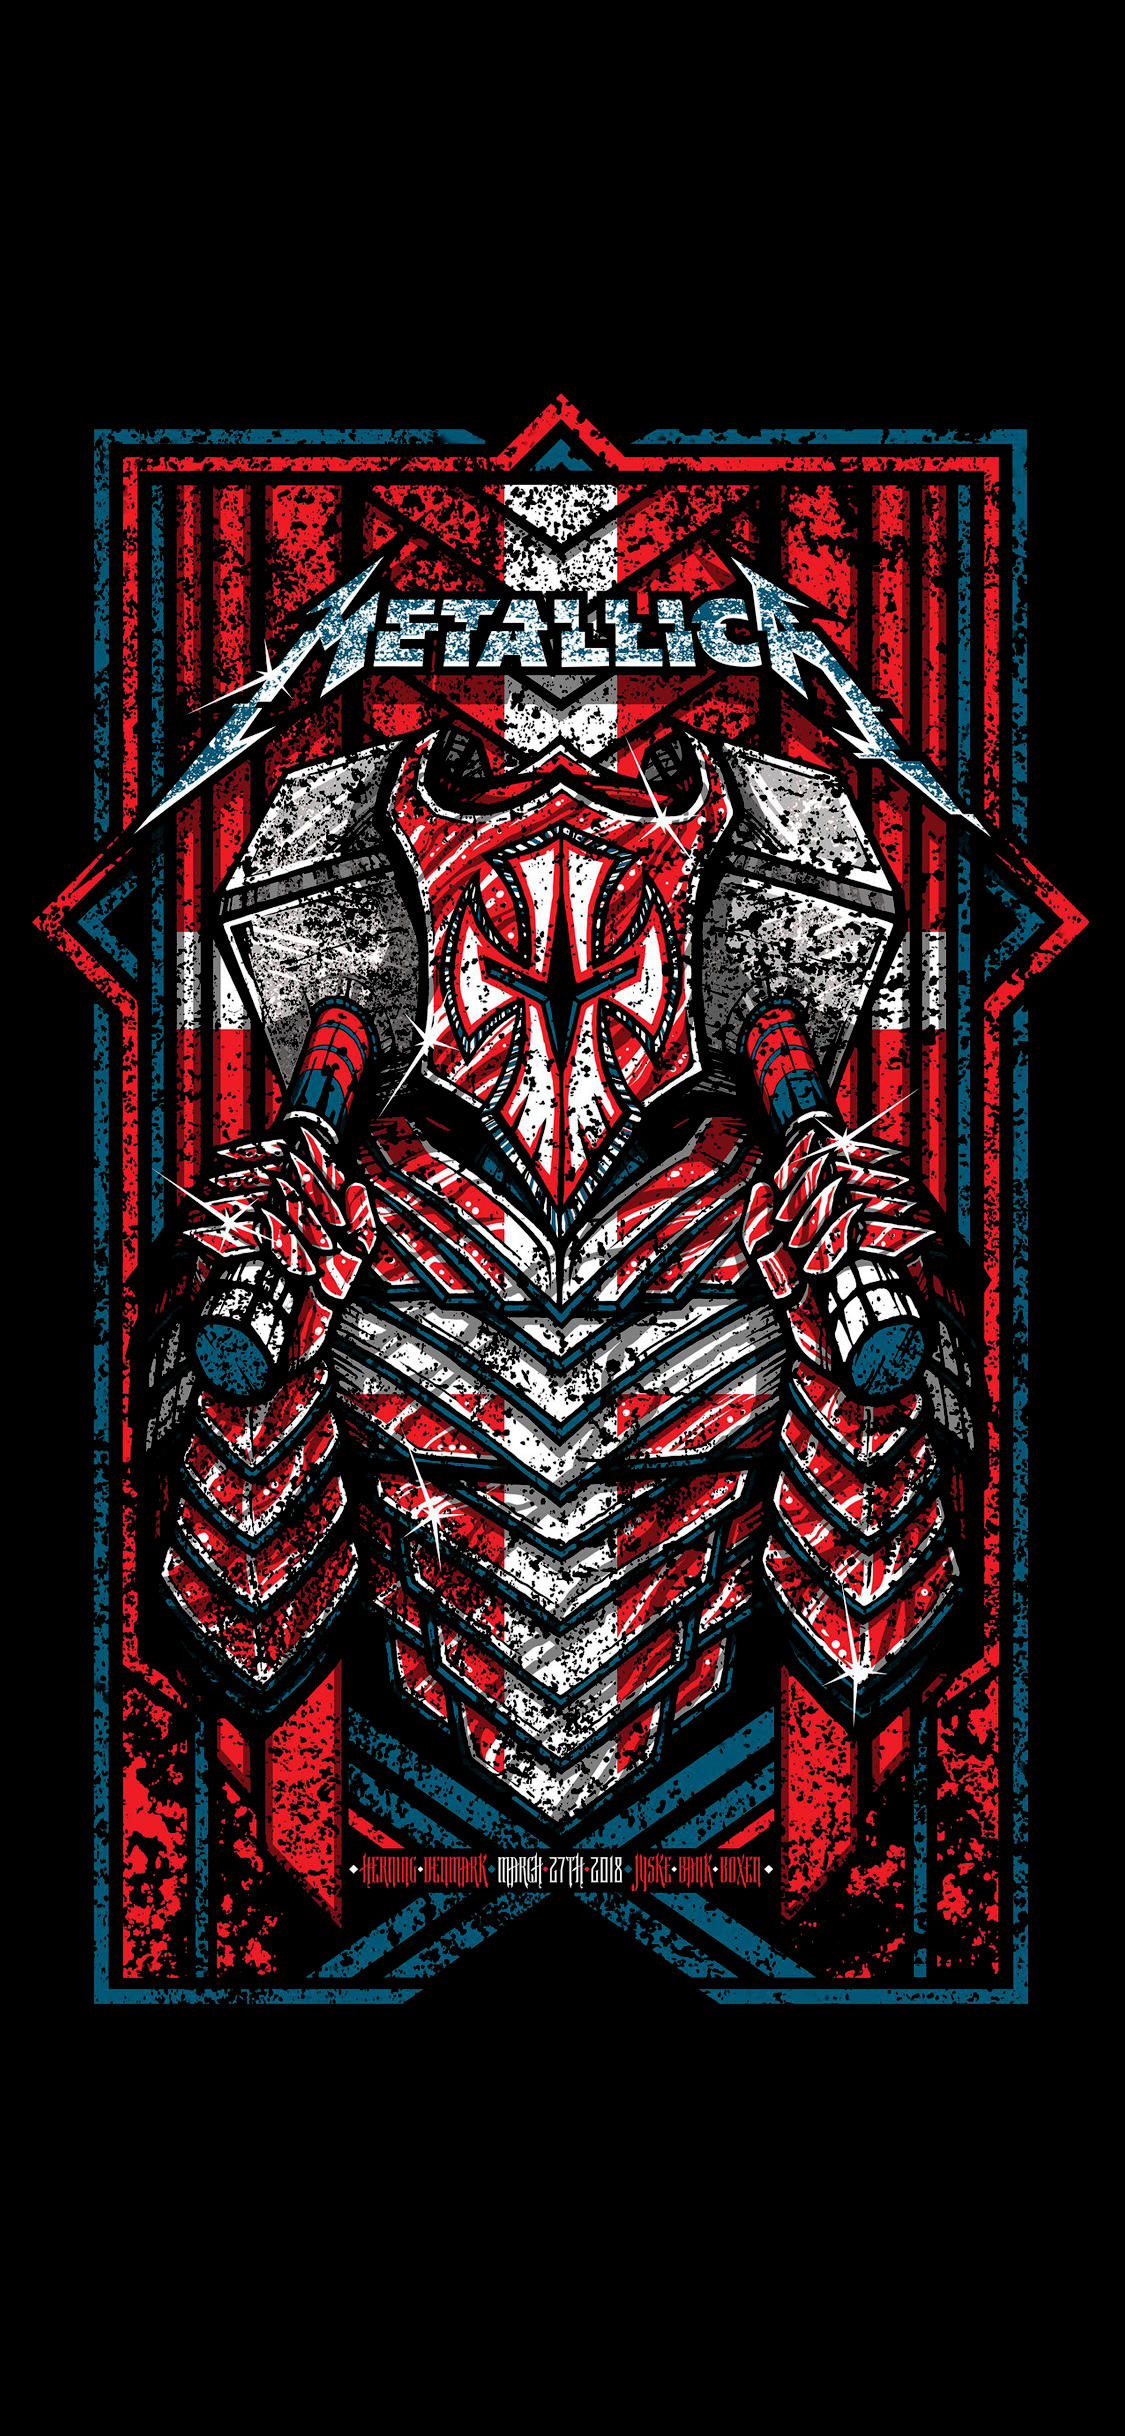 Metallica Tour Poster up the blacks, and resized for iPhone X. [1125x2436]